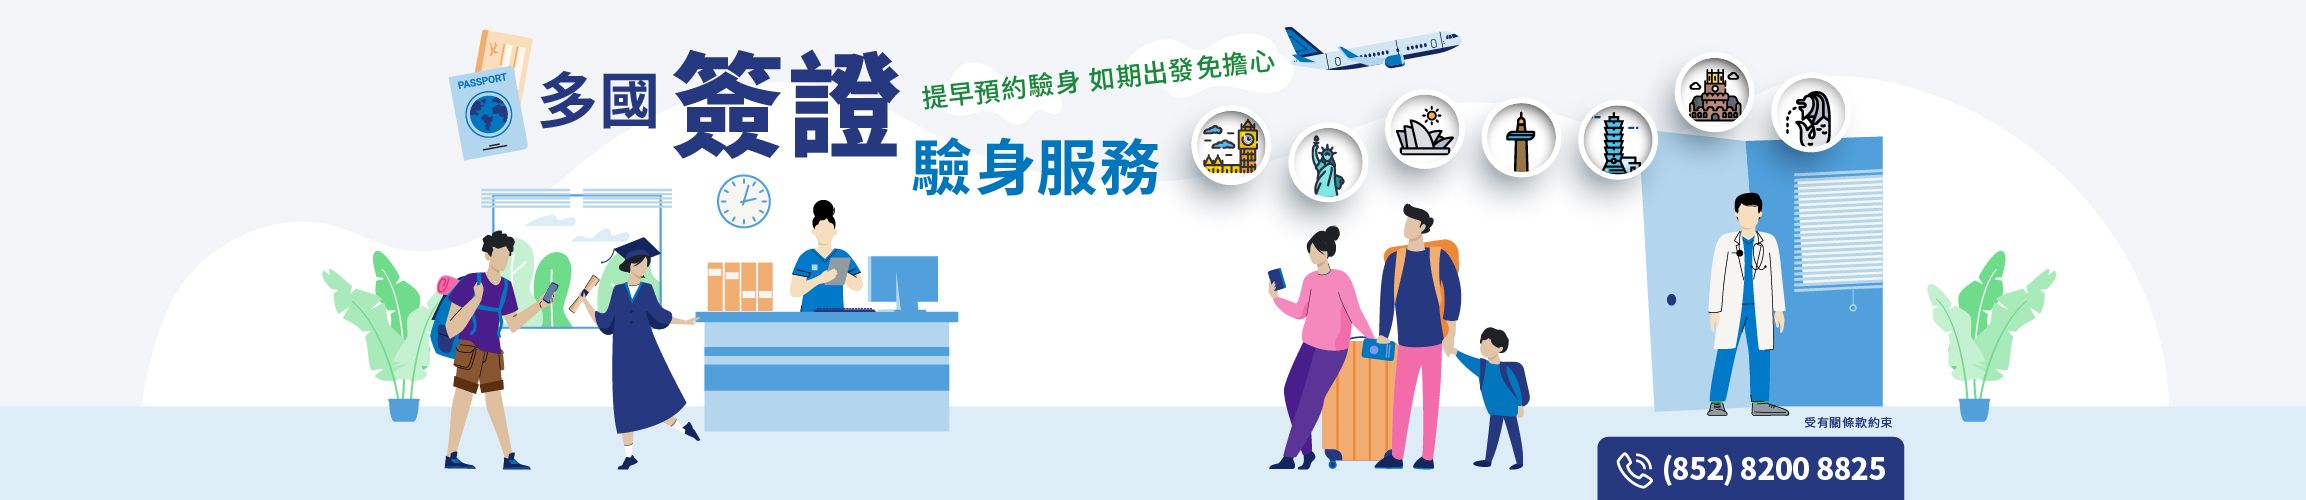 Quality HealthCare visa medical examination services banner_Chinese